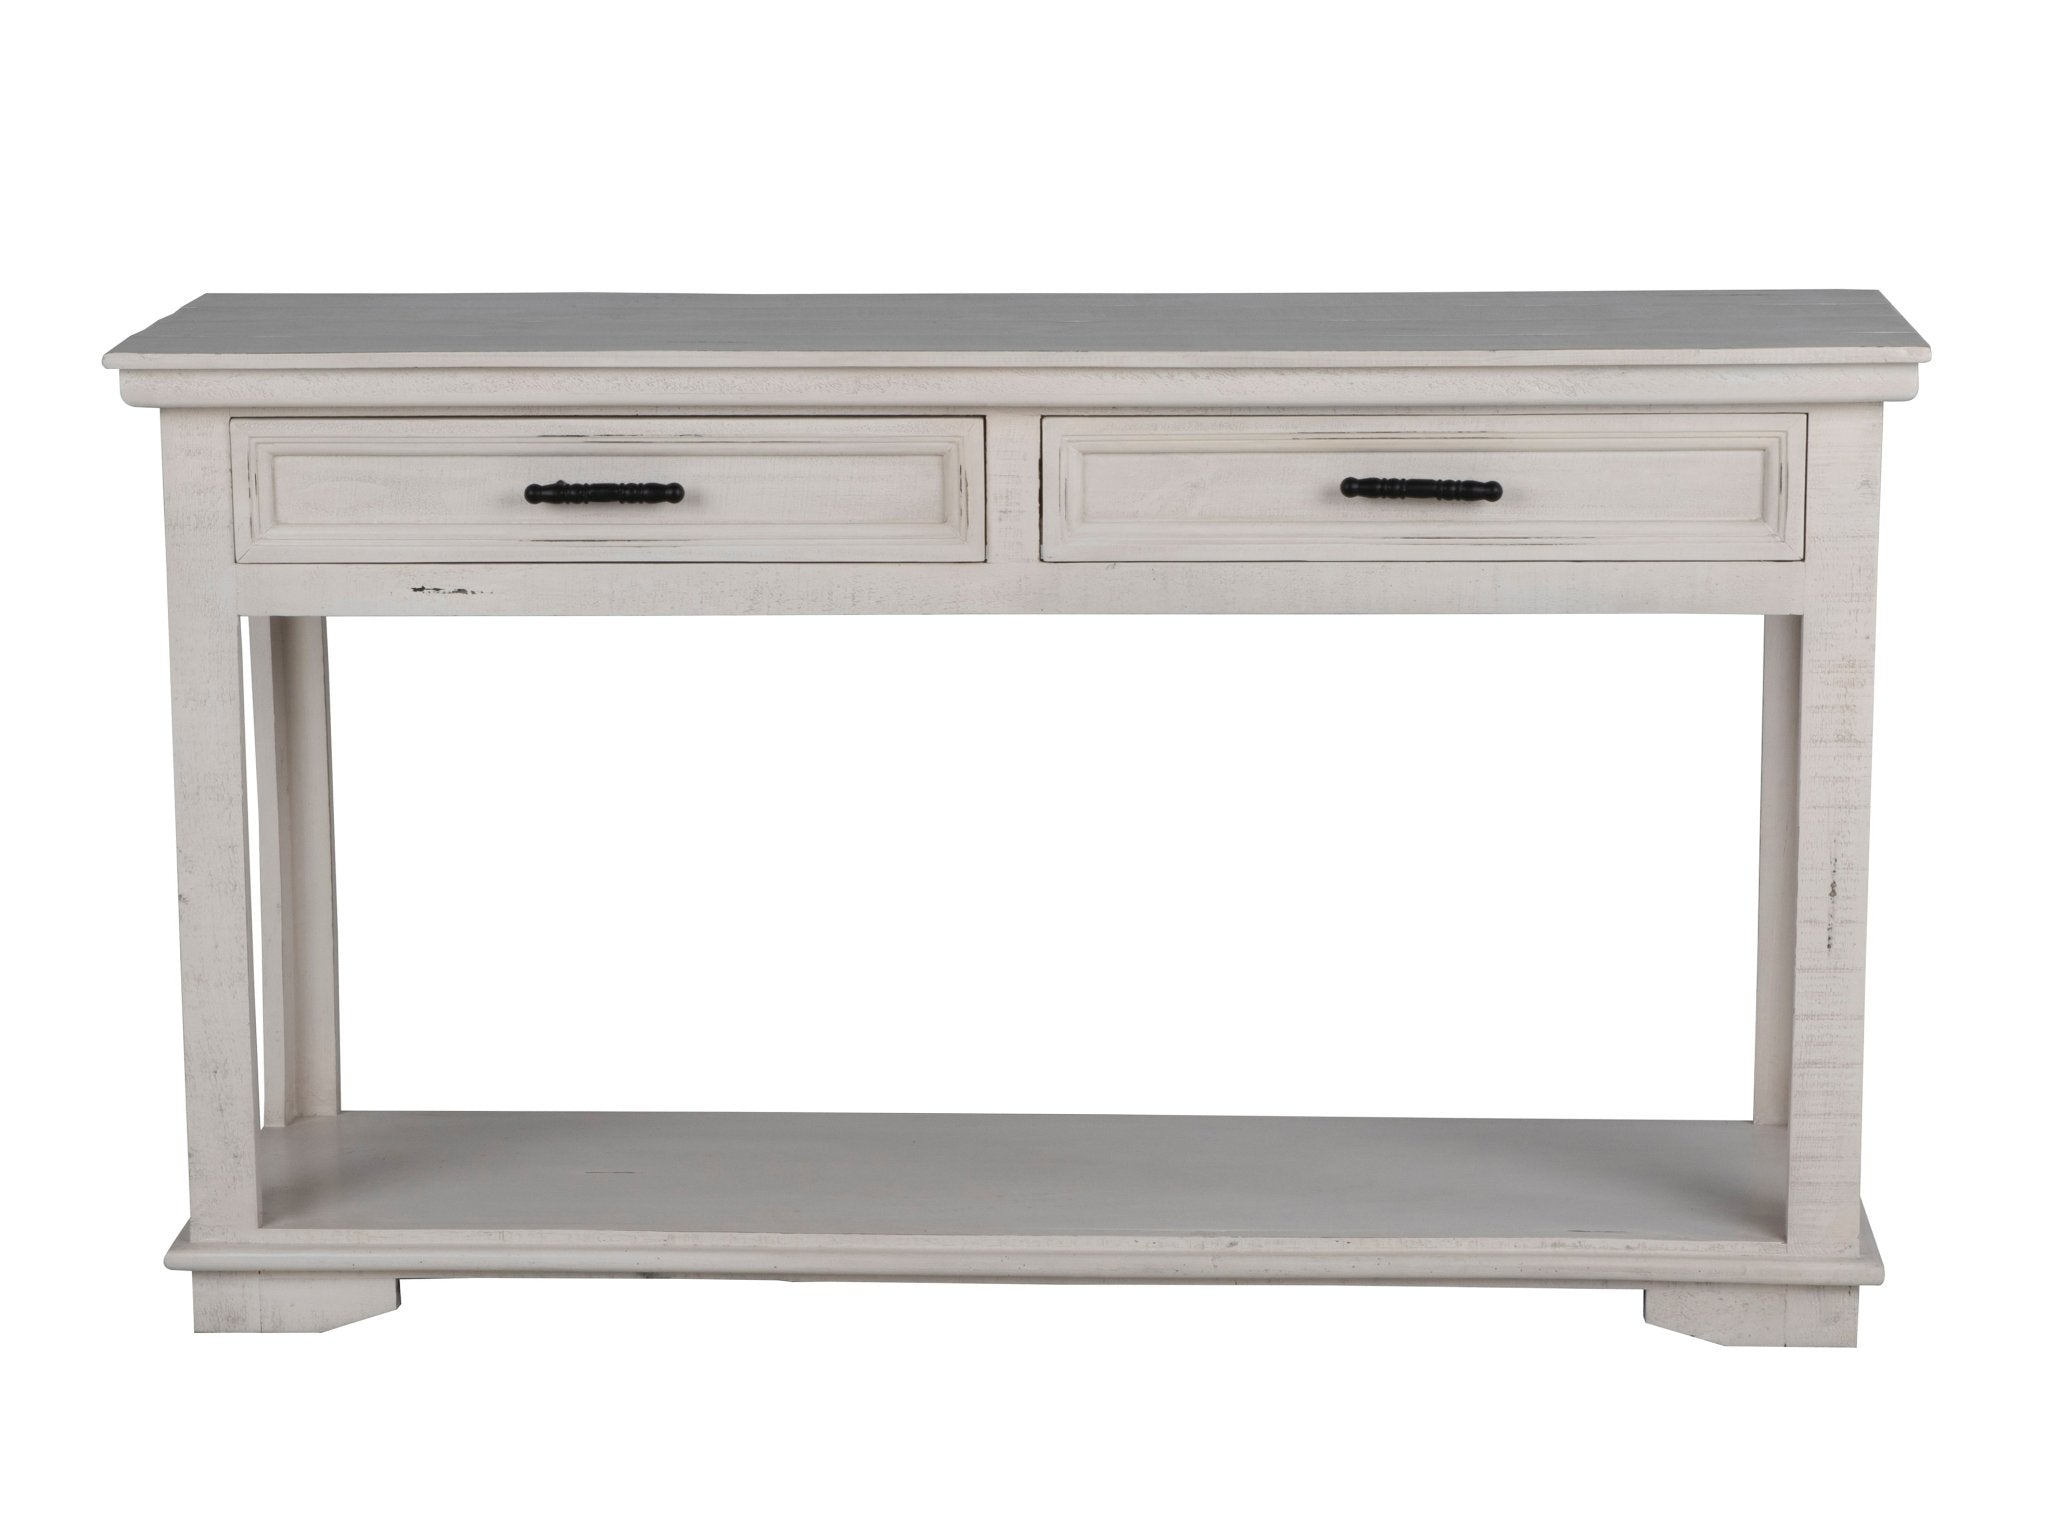 CONSOLE TABLE / SOFA TABLE - BEL Furniture